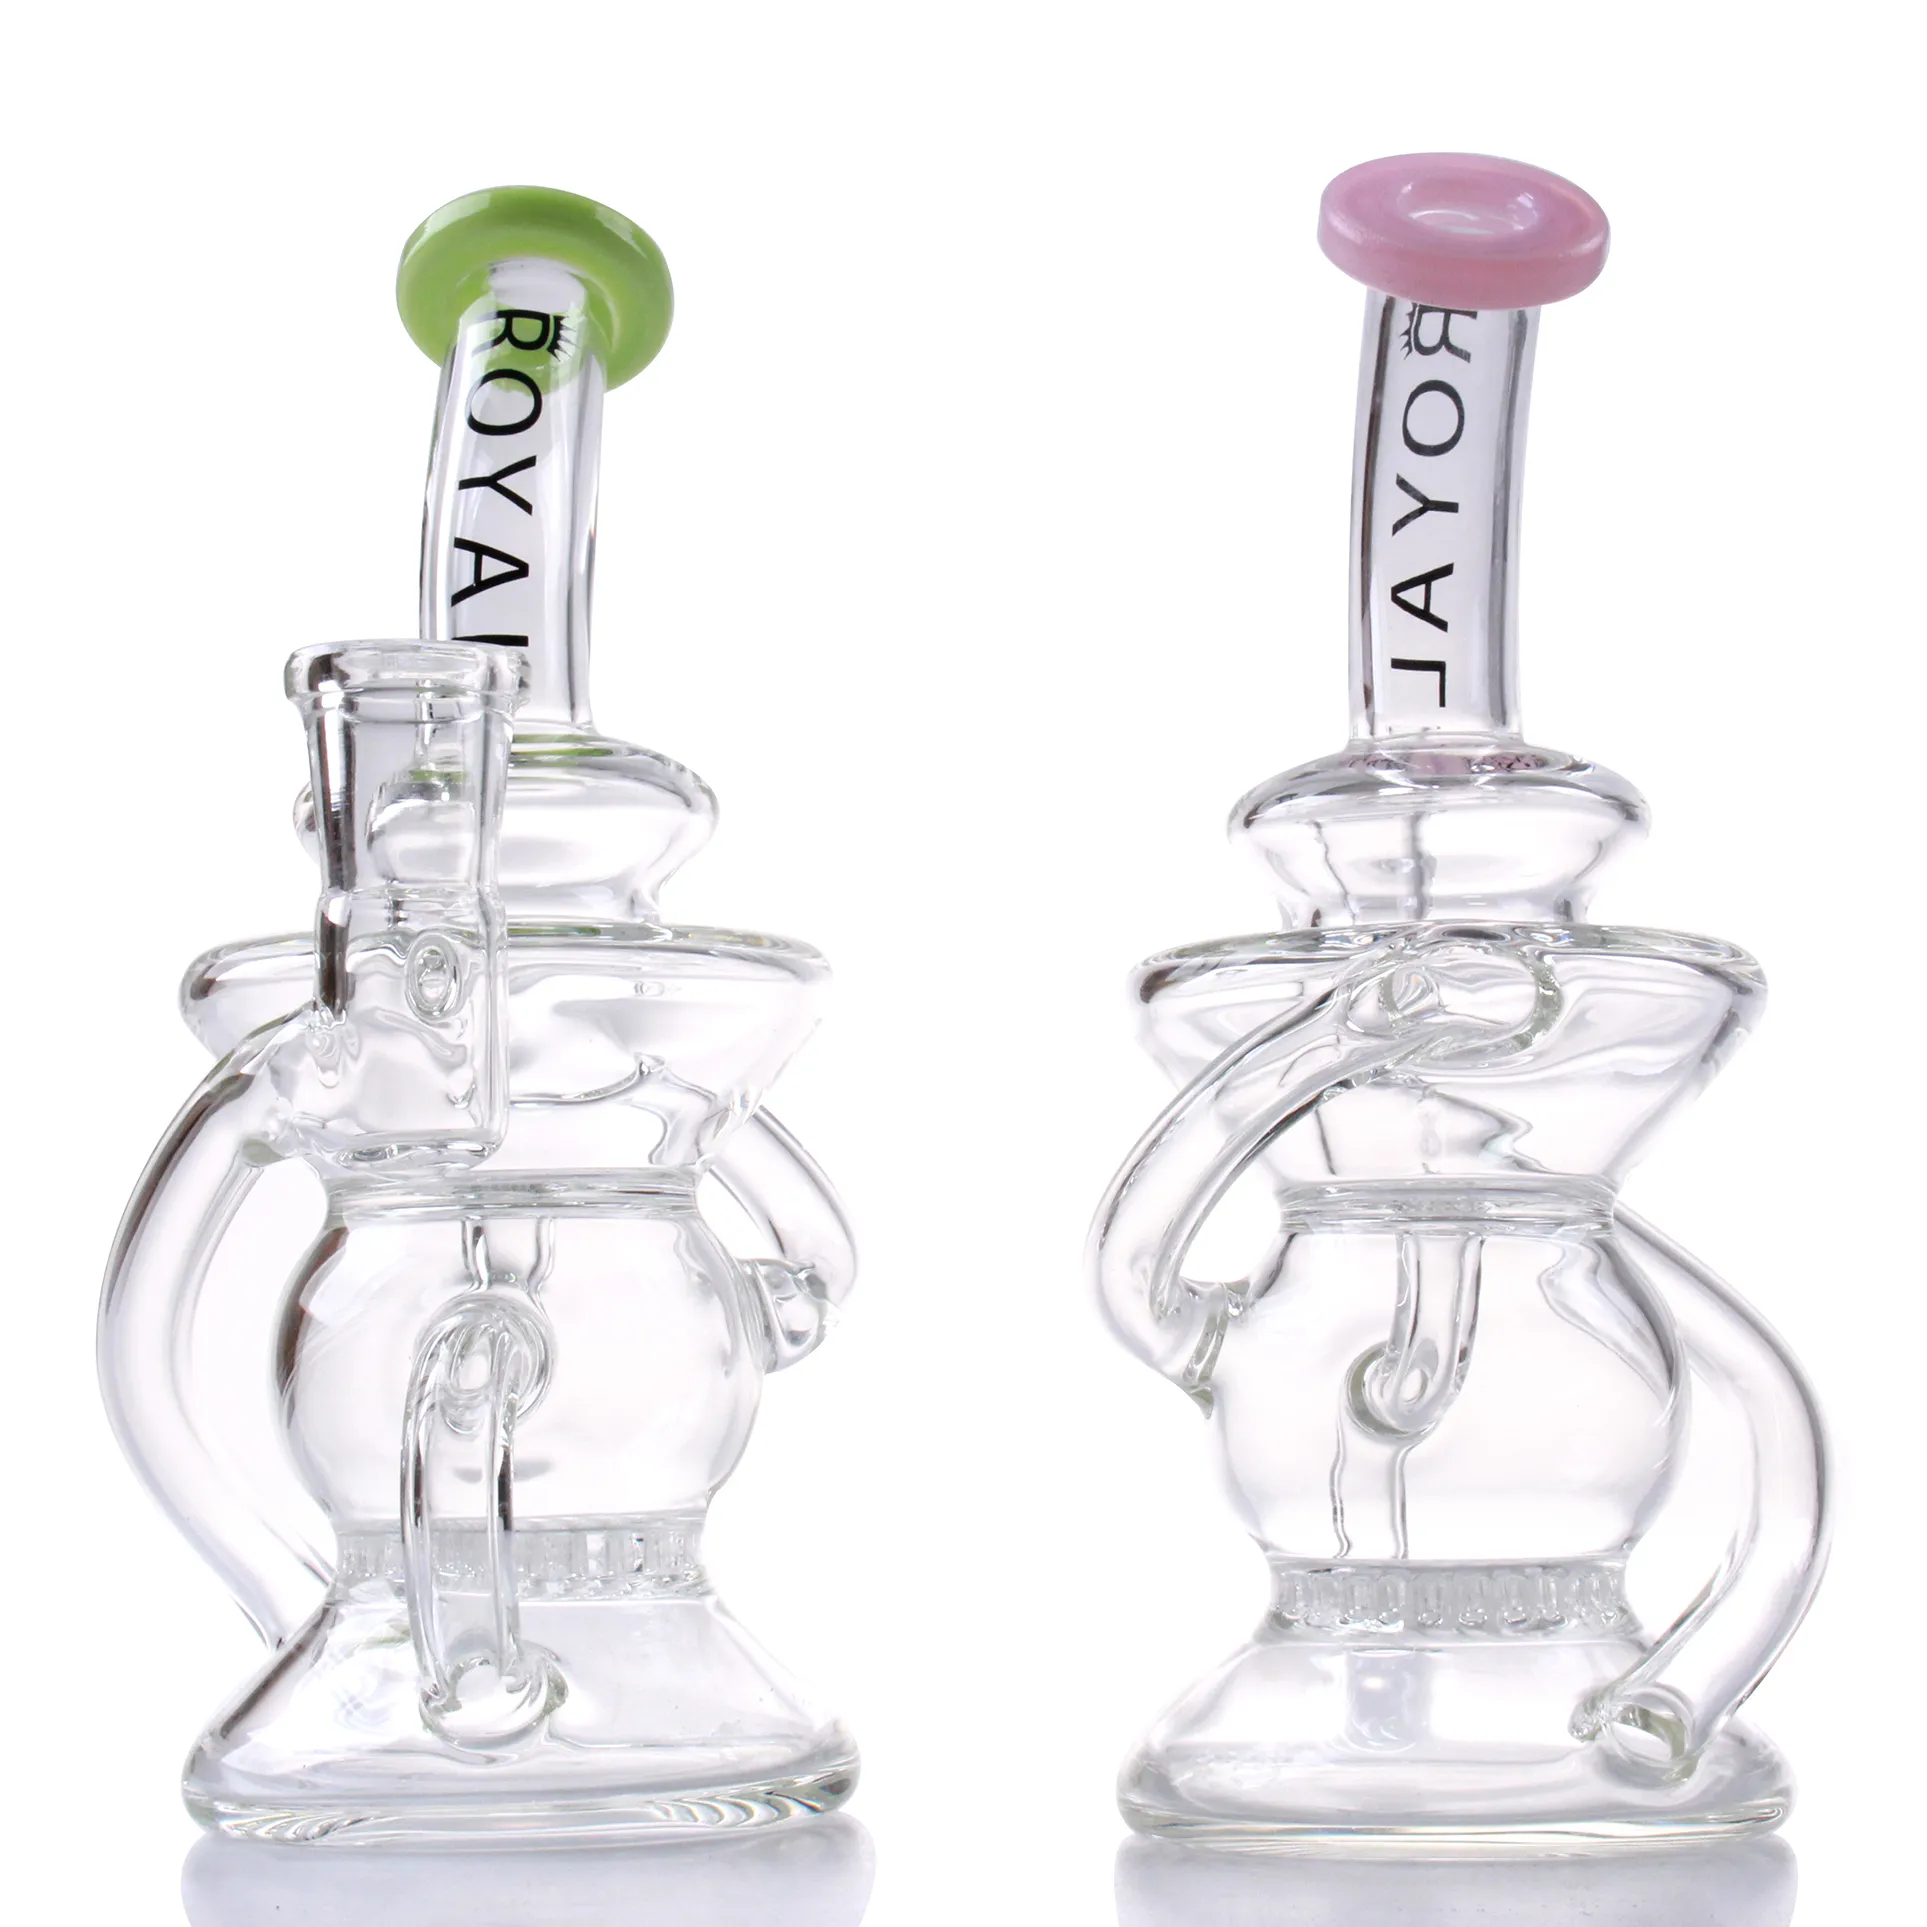 Royal Glasshukas Wasserbong mit Bienenwabe Perc Farbe Lippe Weibliche 14,5 mm Recycling DAB-Rigs